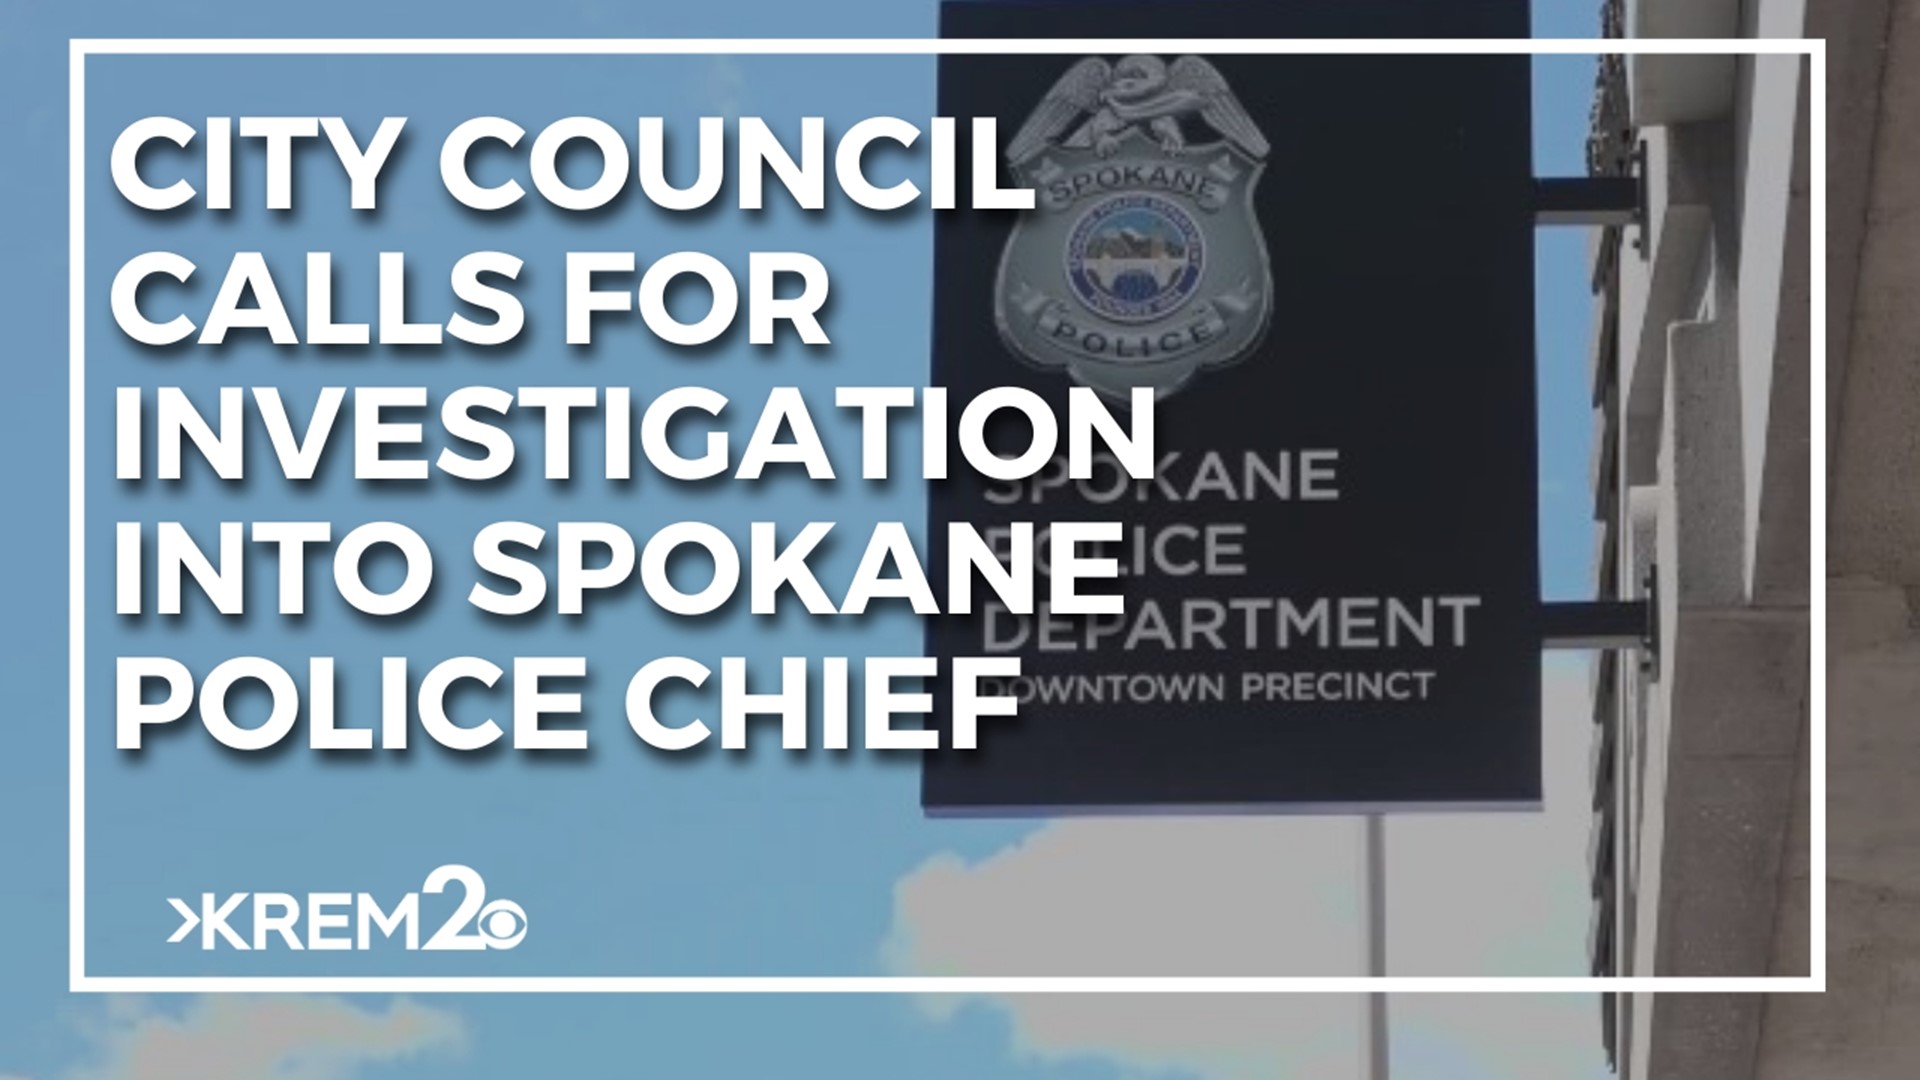 This development comes several weeks after Spokane Police Chief Craig Meidl was accused of giving special access and information to downtown business owners.